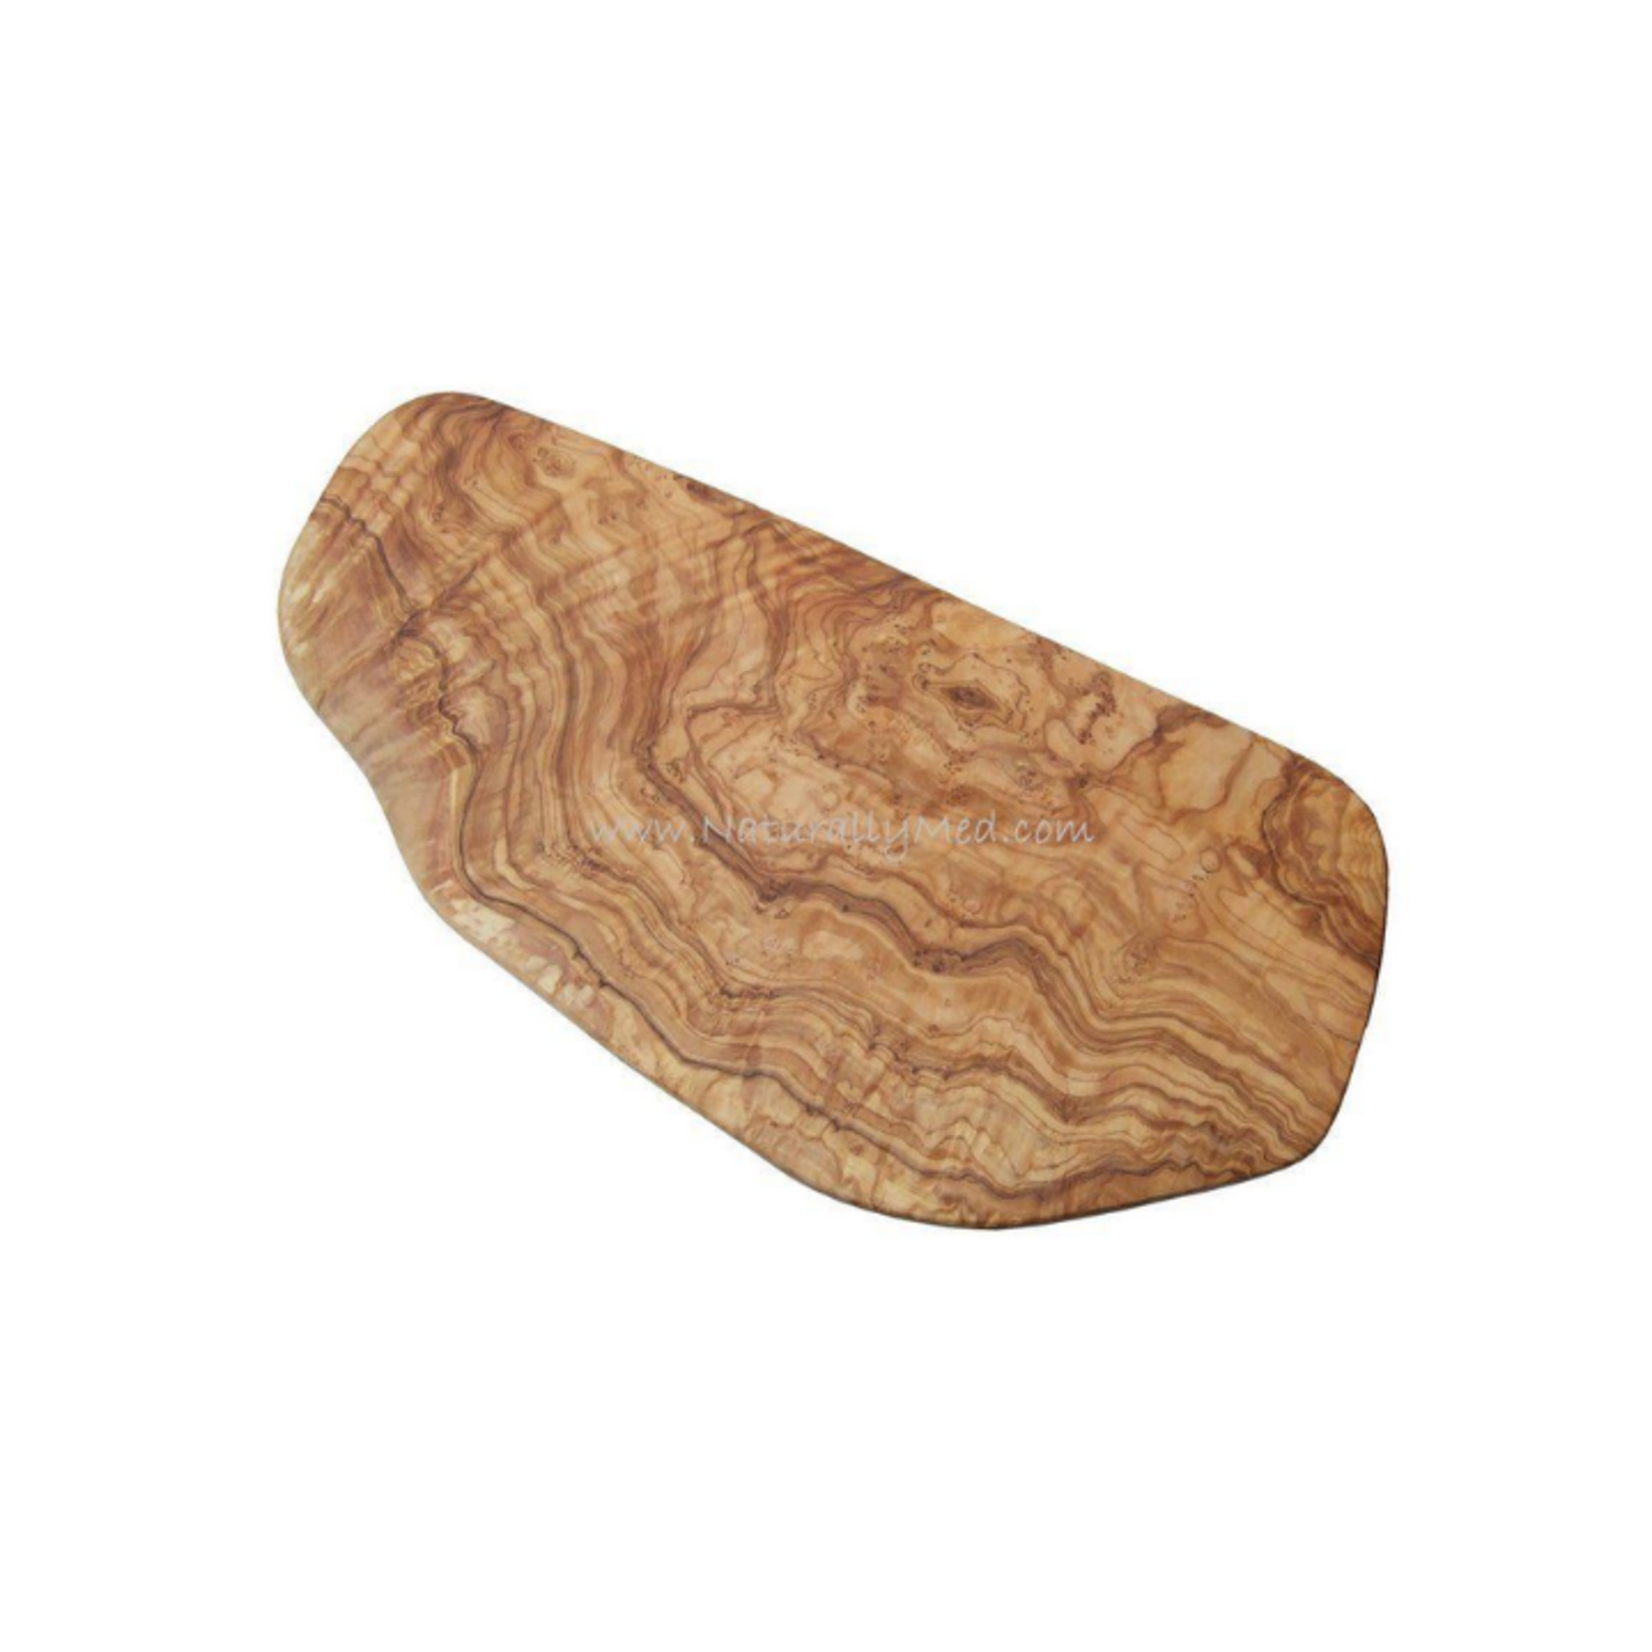 Naturally Med Olive Wood Cutting/Serving Board - 15.5"